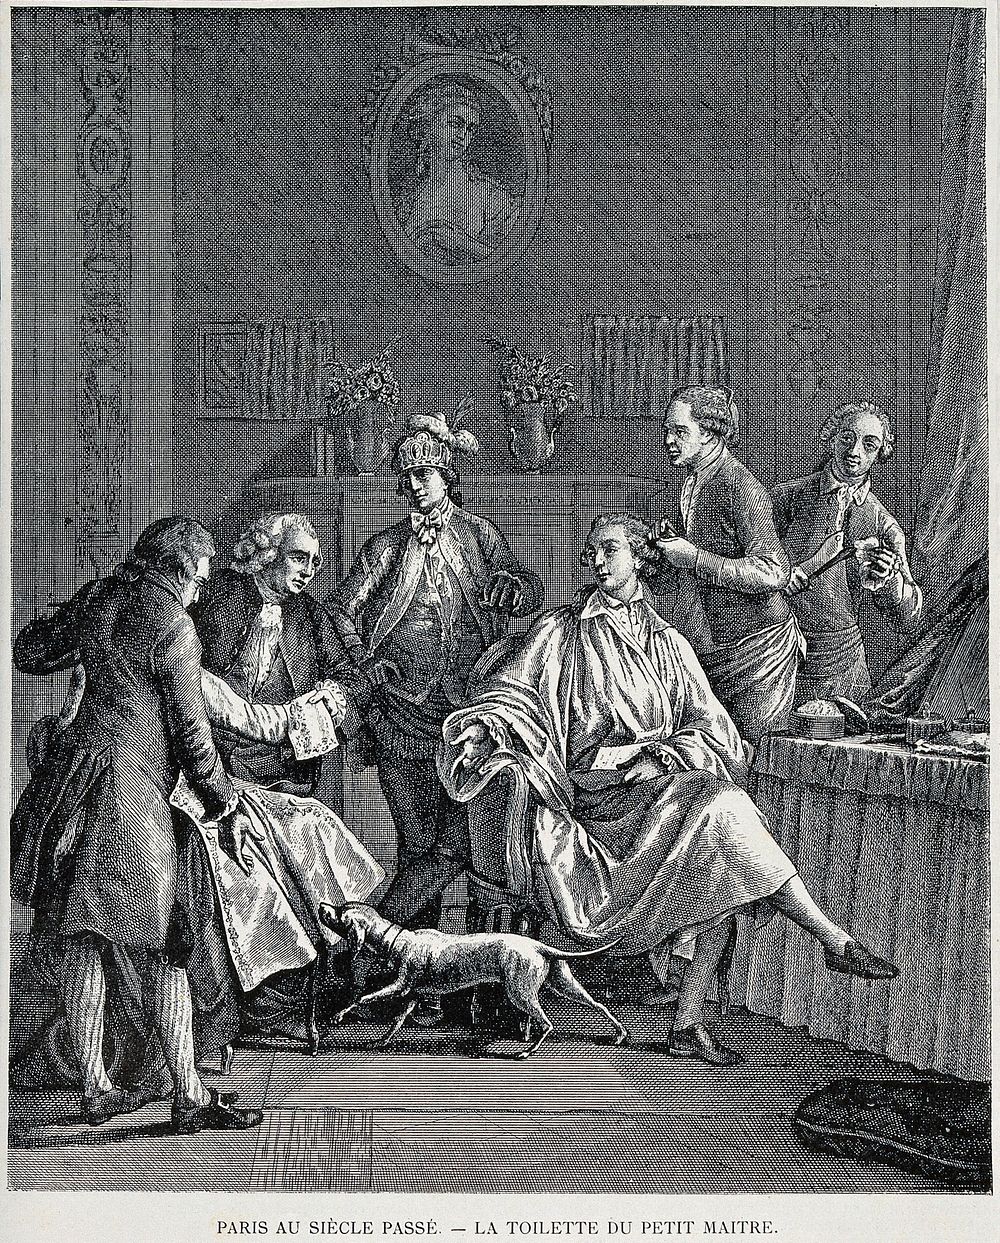 A man at his toilet surrounded by male servants and visitors. Reproduction of an engraving.